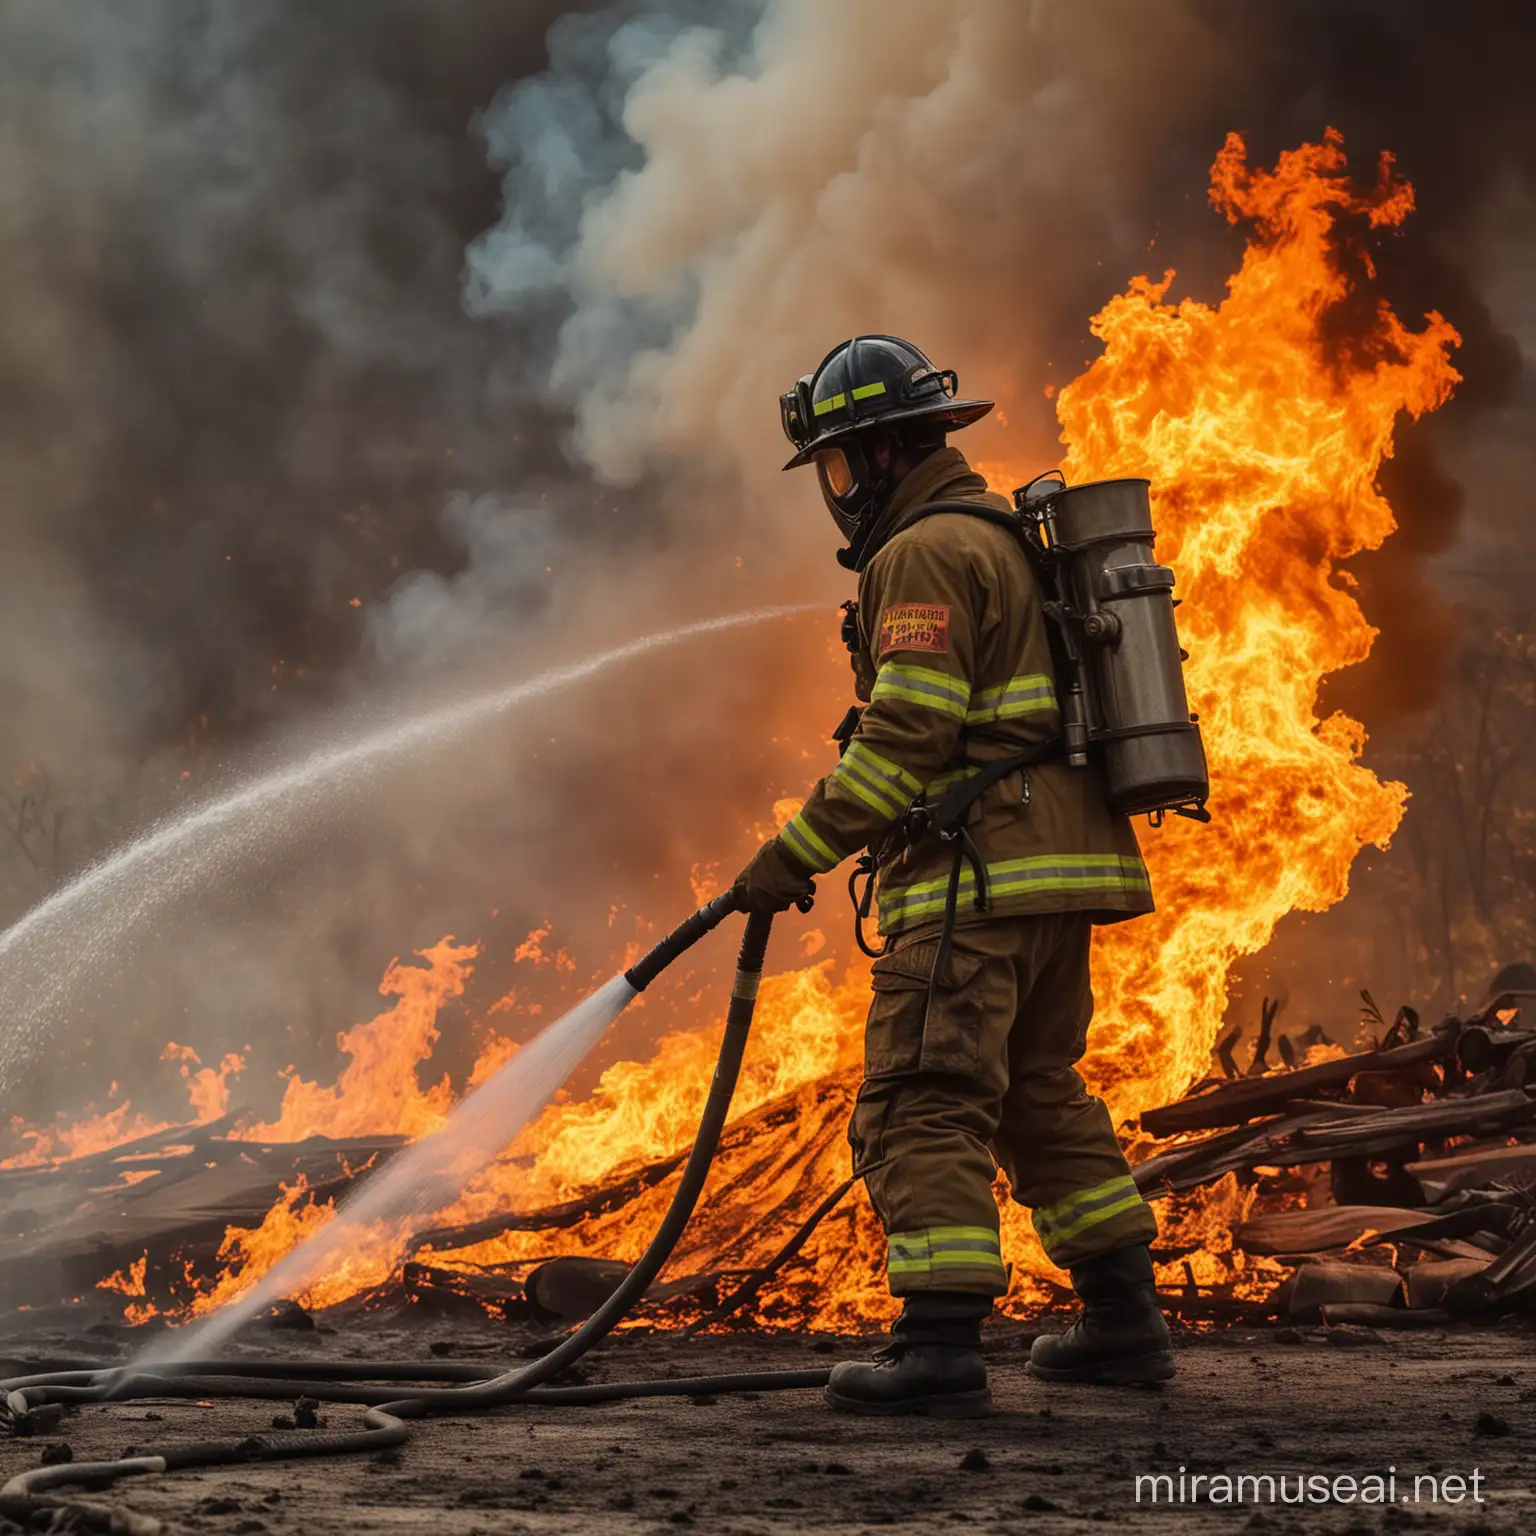 Courageous Firefighter Battling Blazing Flames with Hose